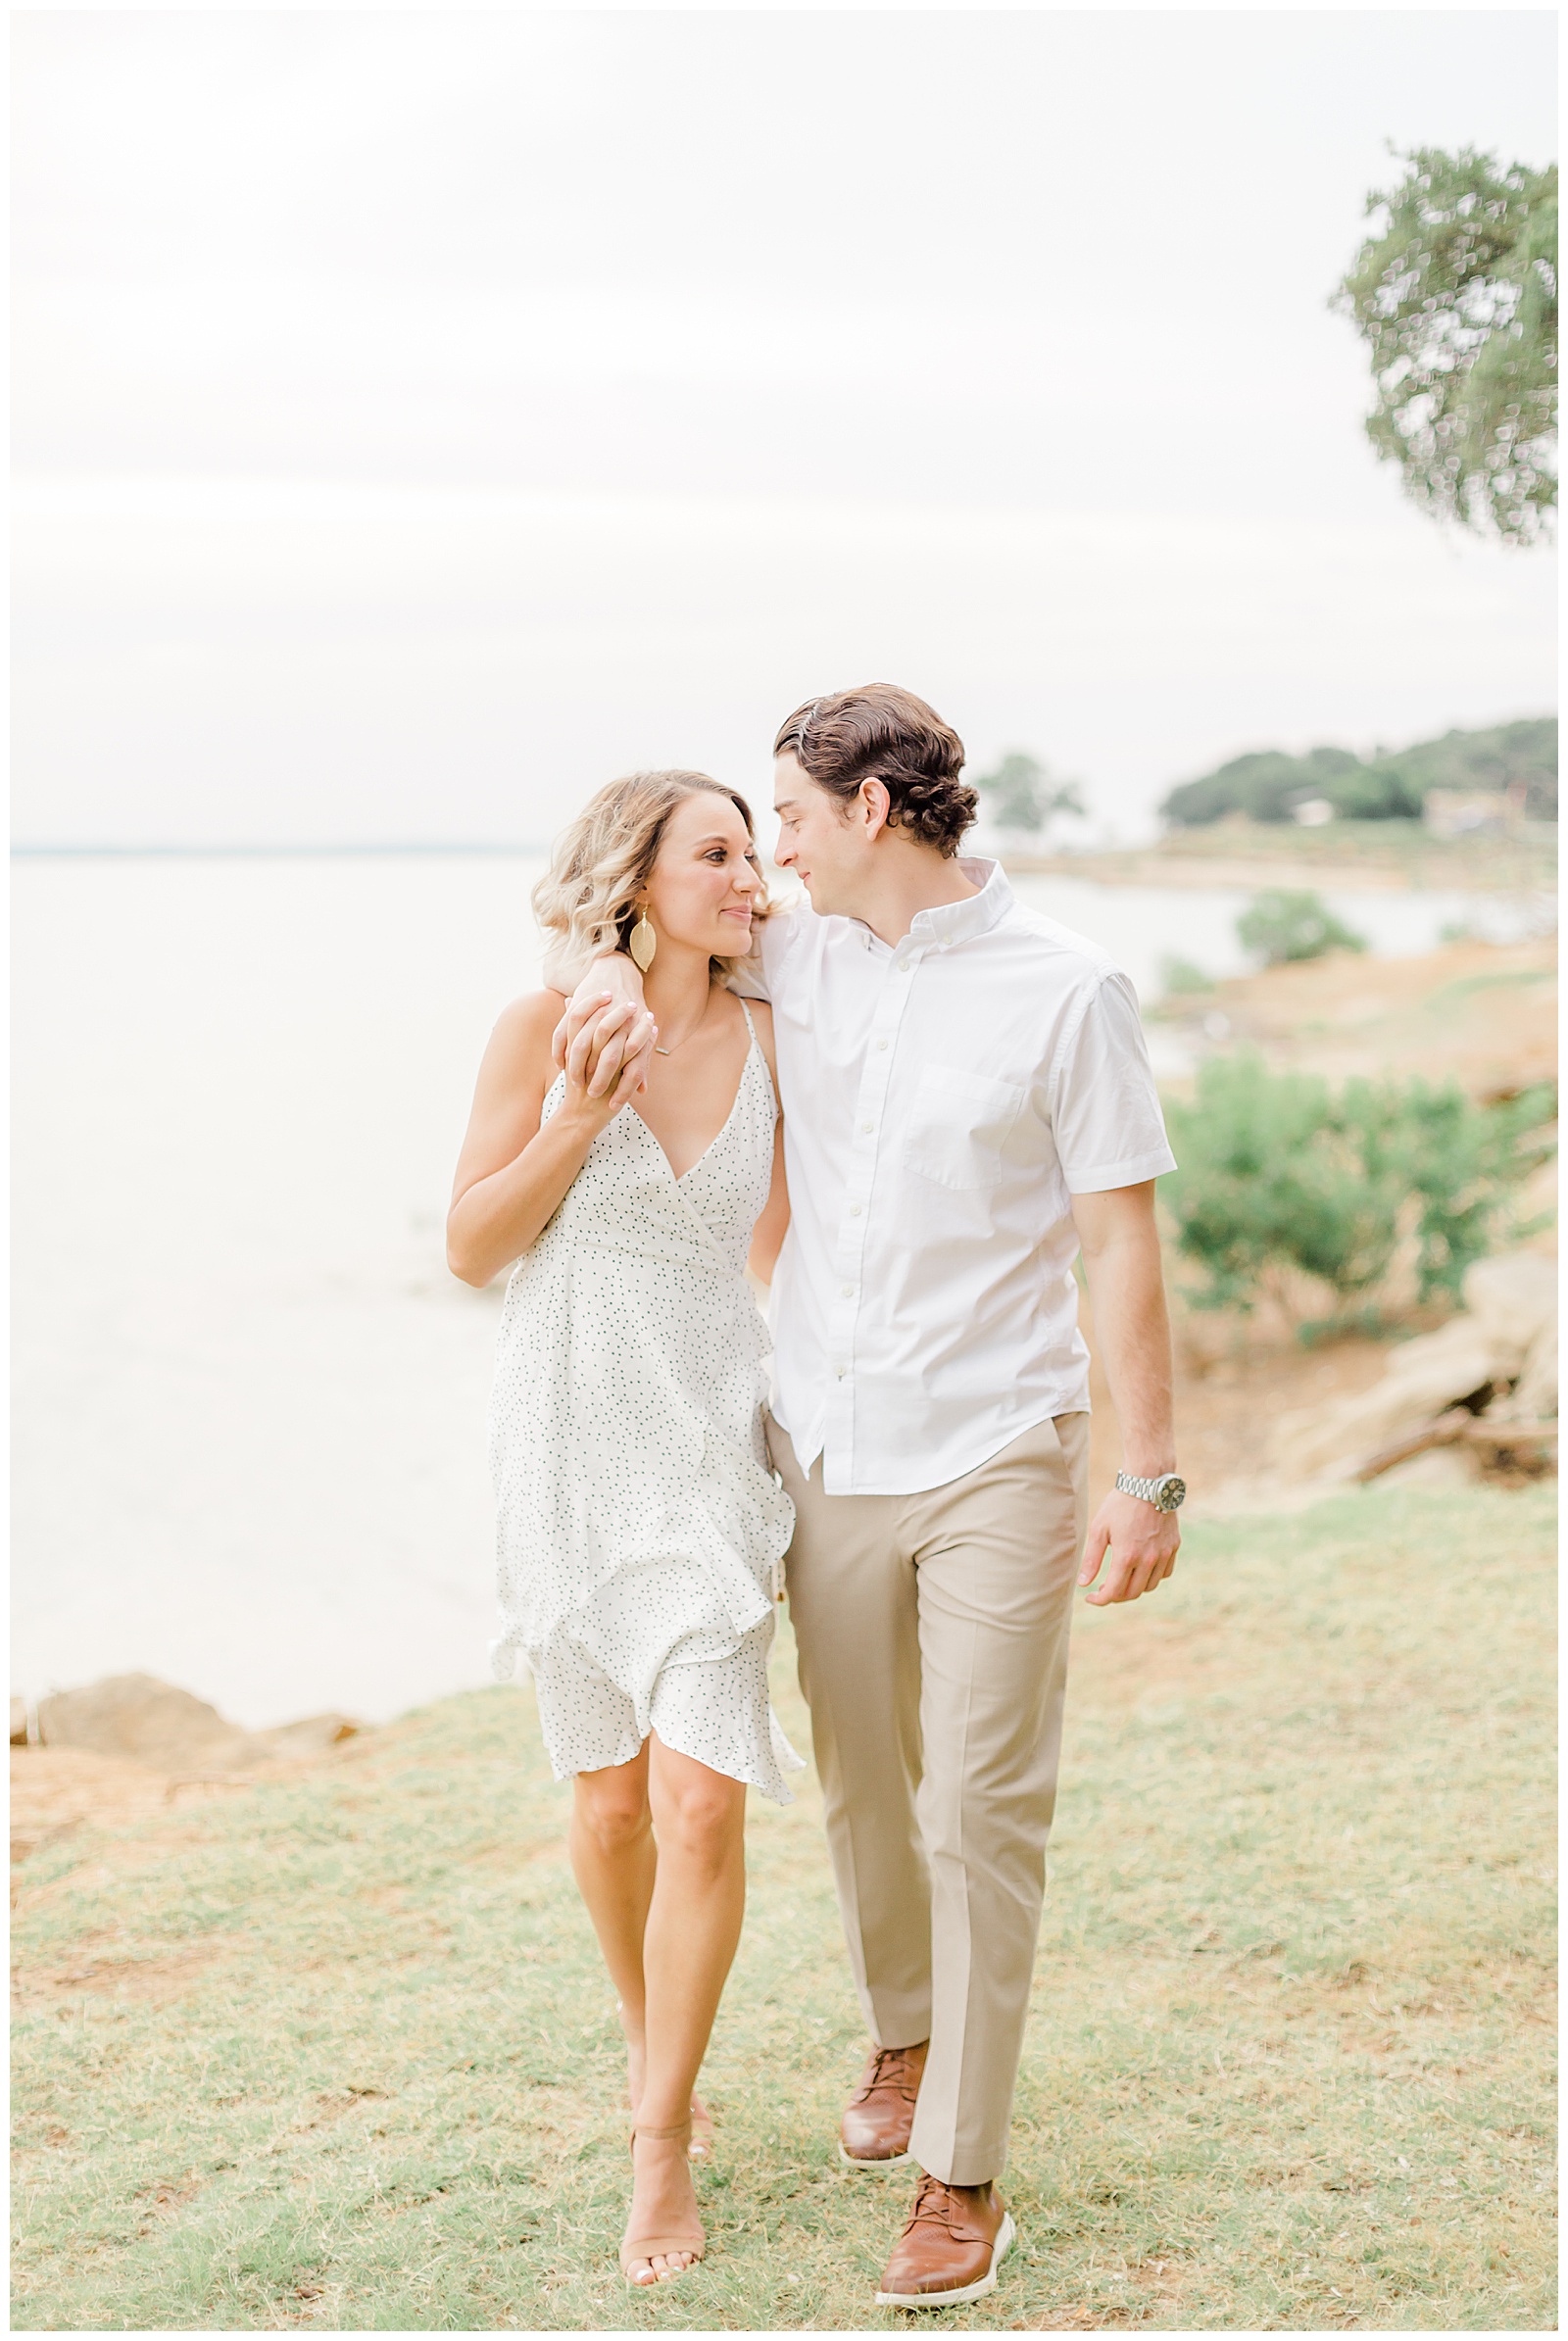 Engagement session outfit inspiration